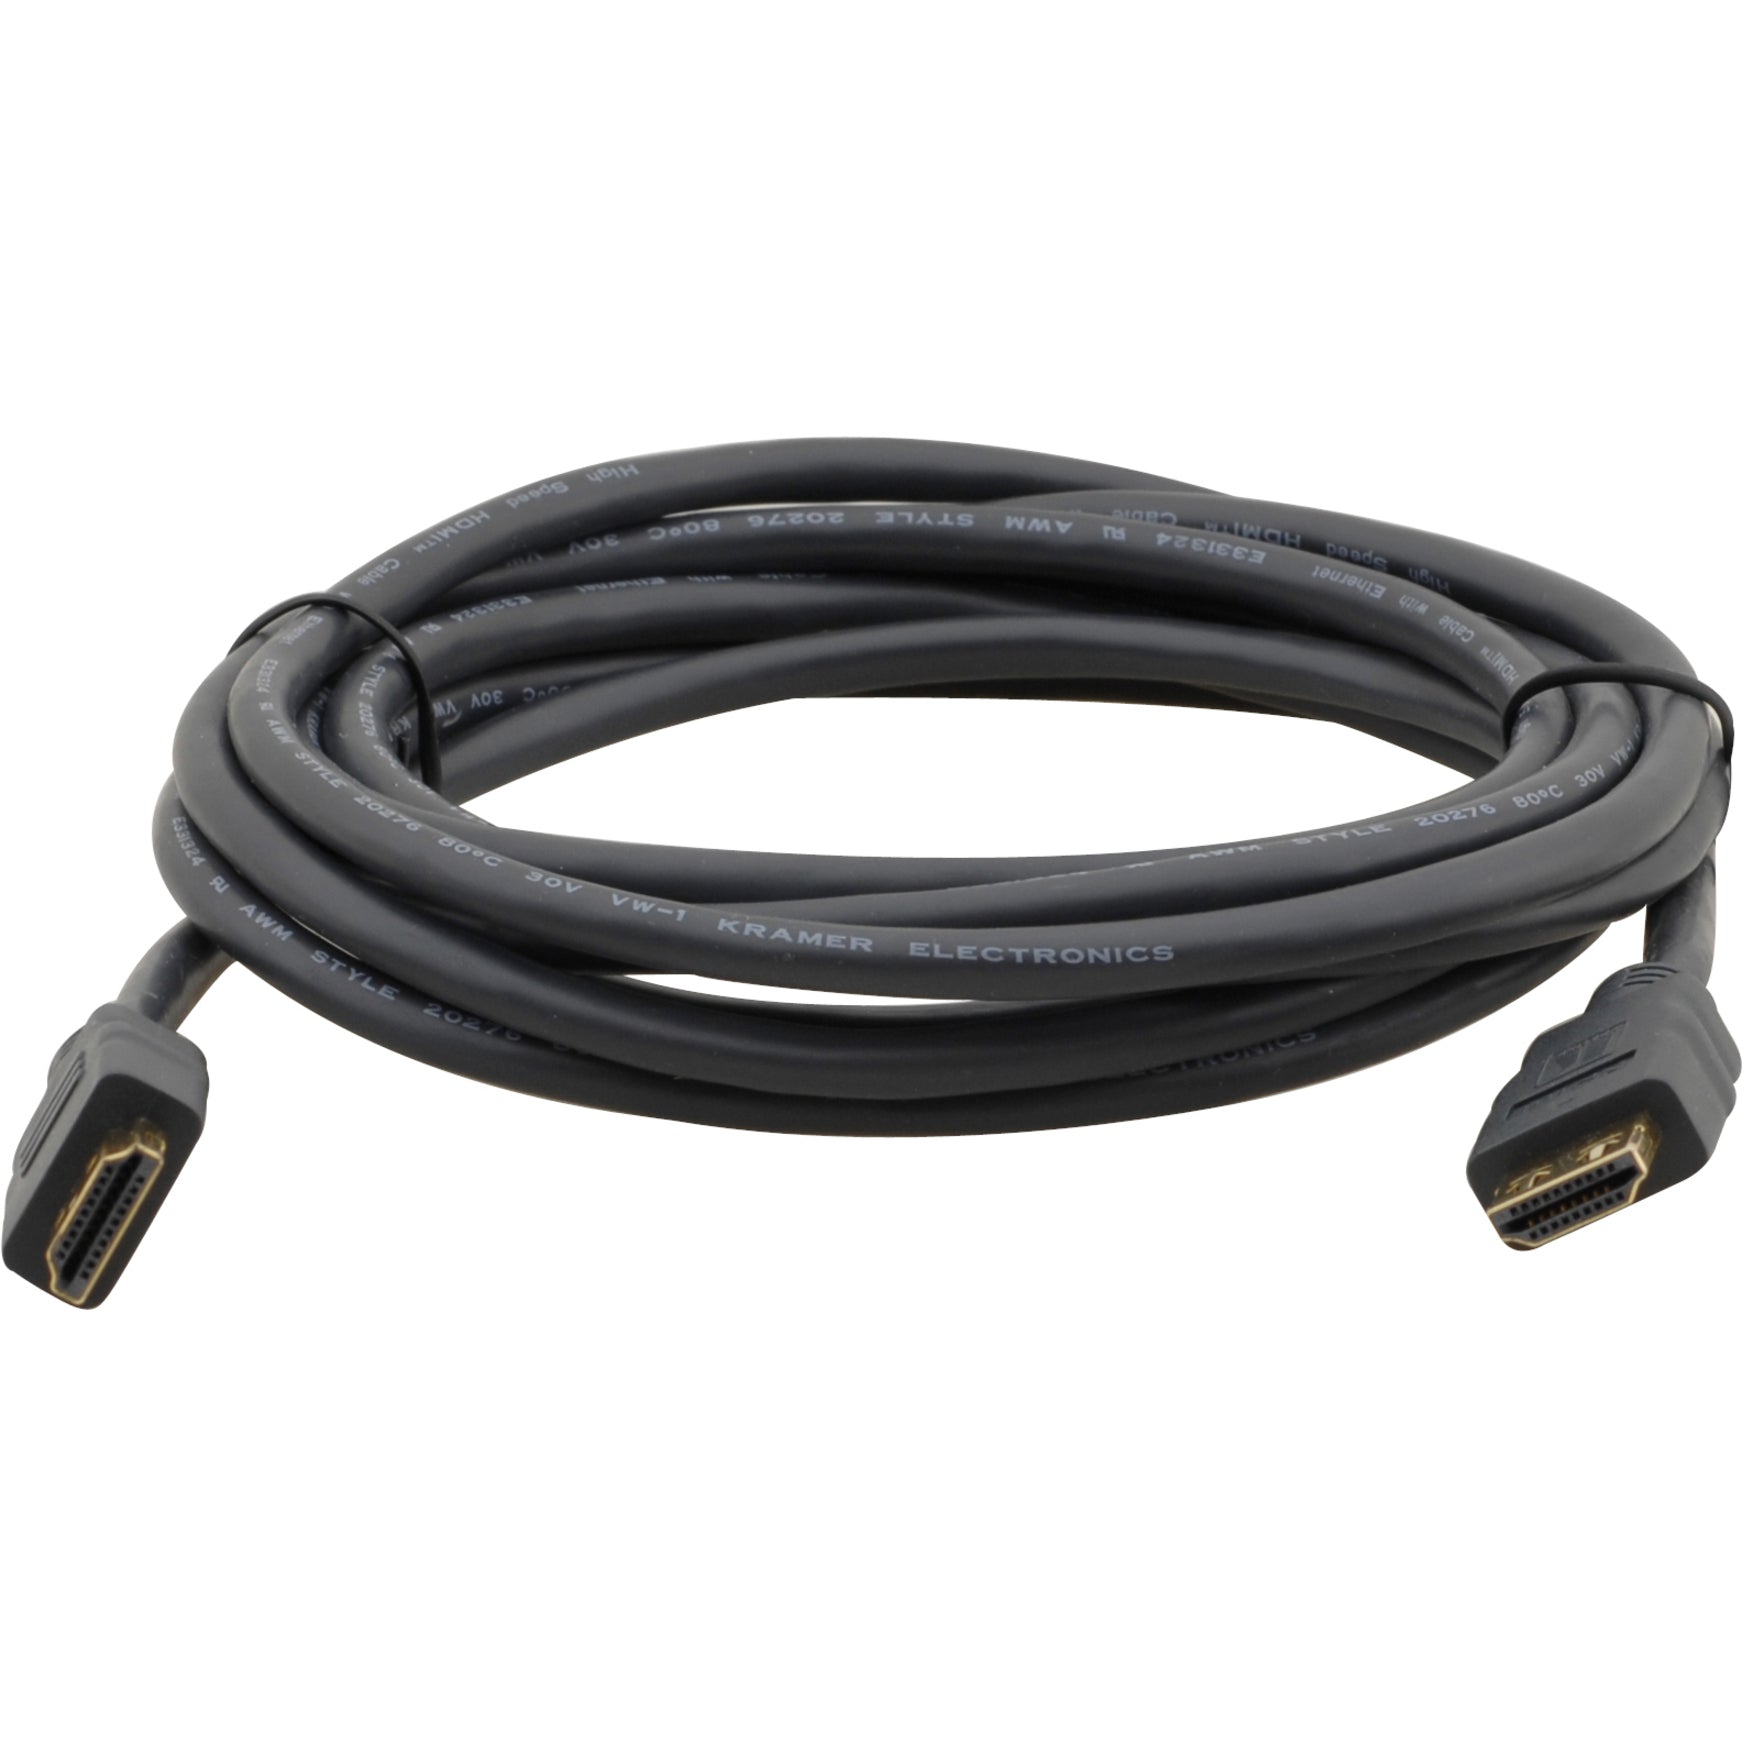 Kramer C-MHM/MHM-6 Flexible High-Speed HDMI Cable with Ethernet, 5.91 ft, Molded